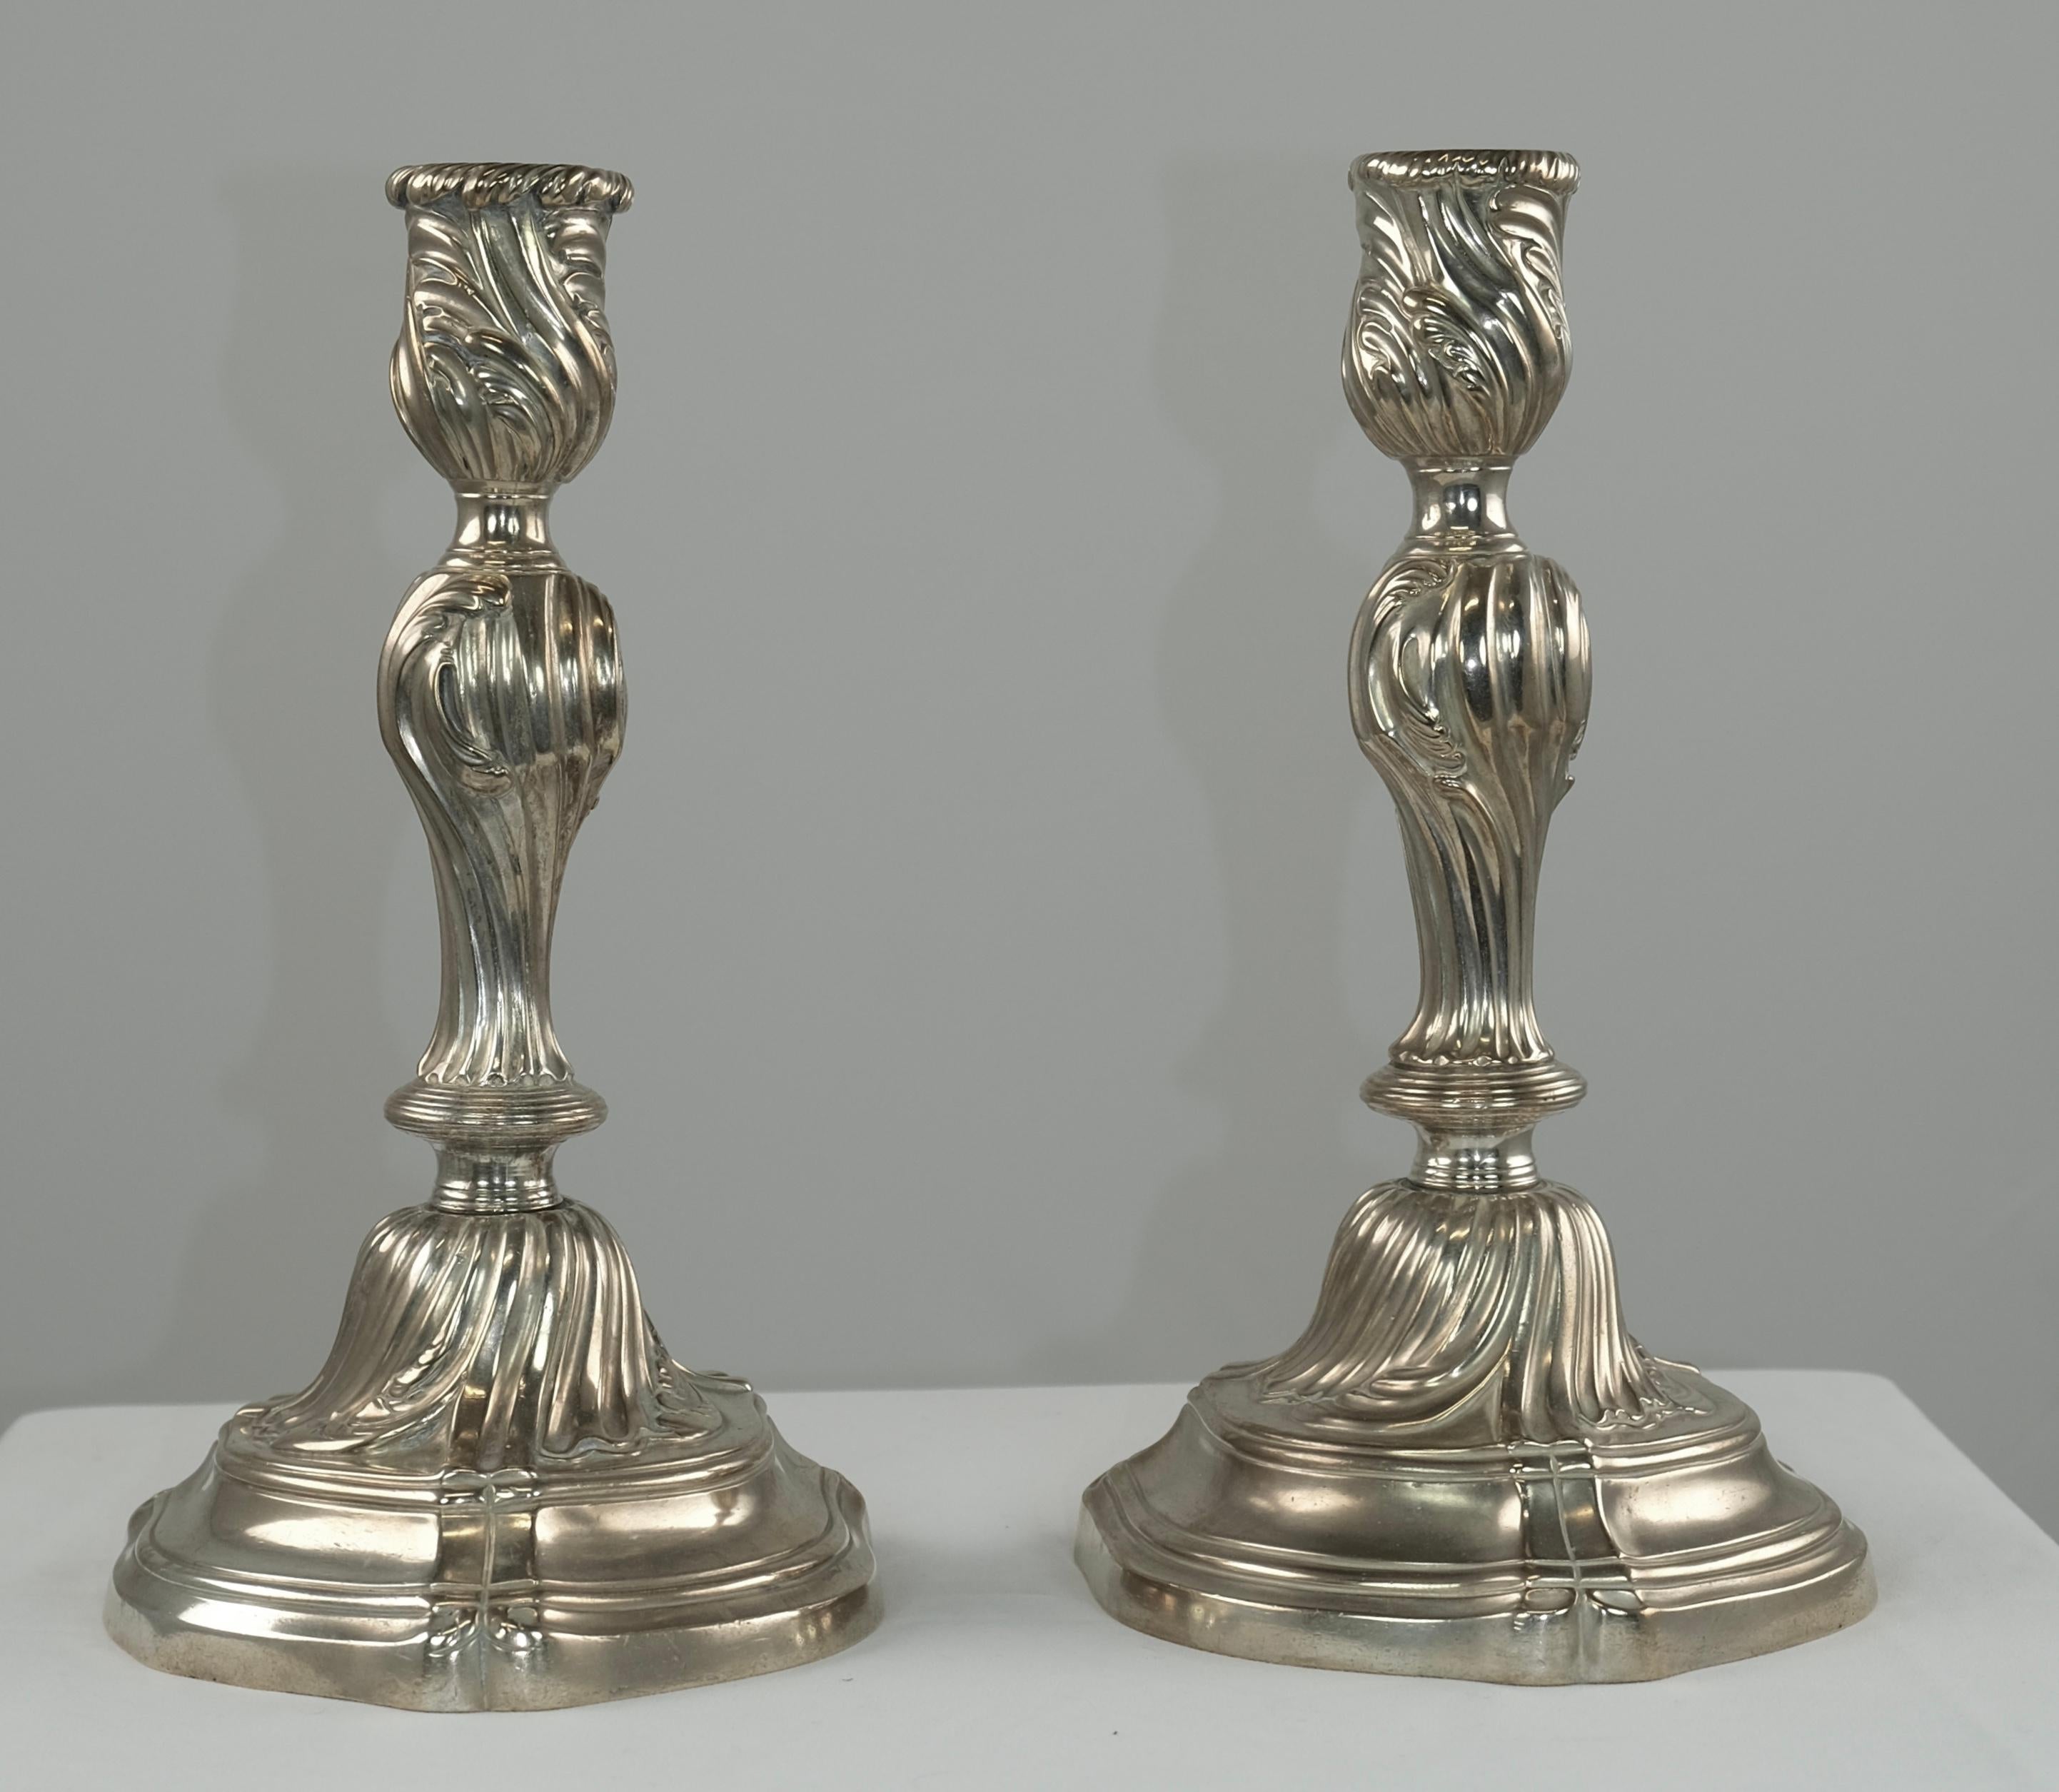 A good quality pair of rococo candlesticks. Good quality on casting and very thick and powerful. Will look great anywhere.